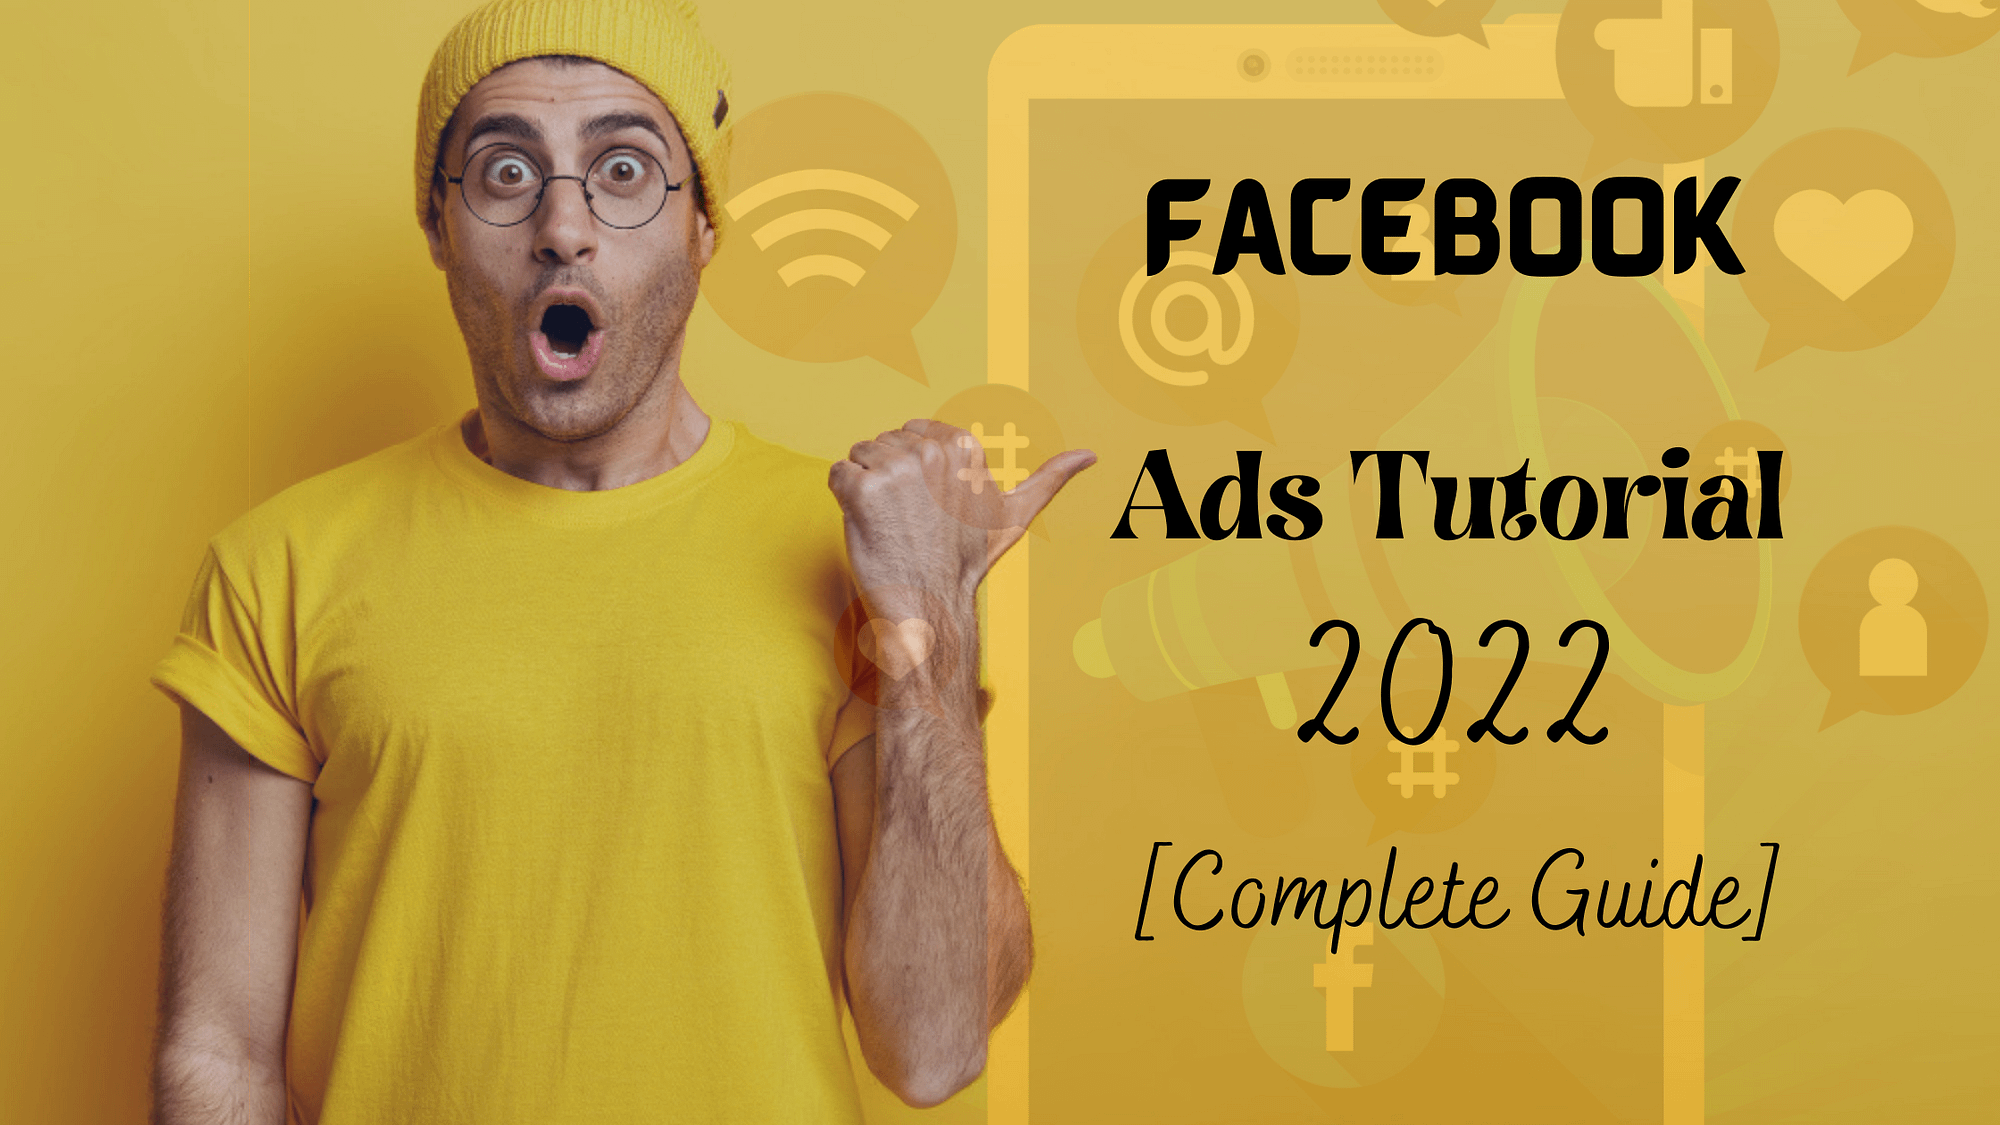 Proven Complete Guide On Facebook Ads Tutorial 2022